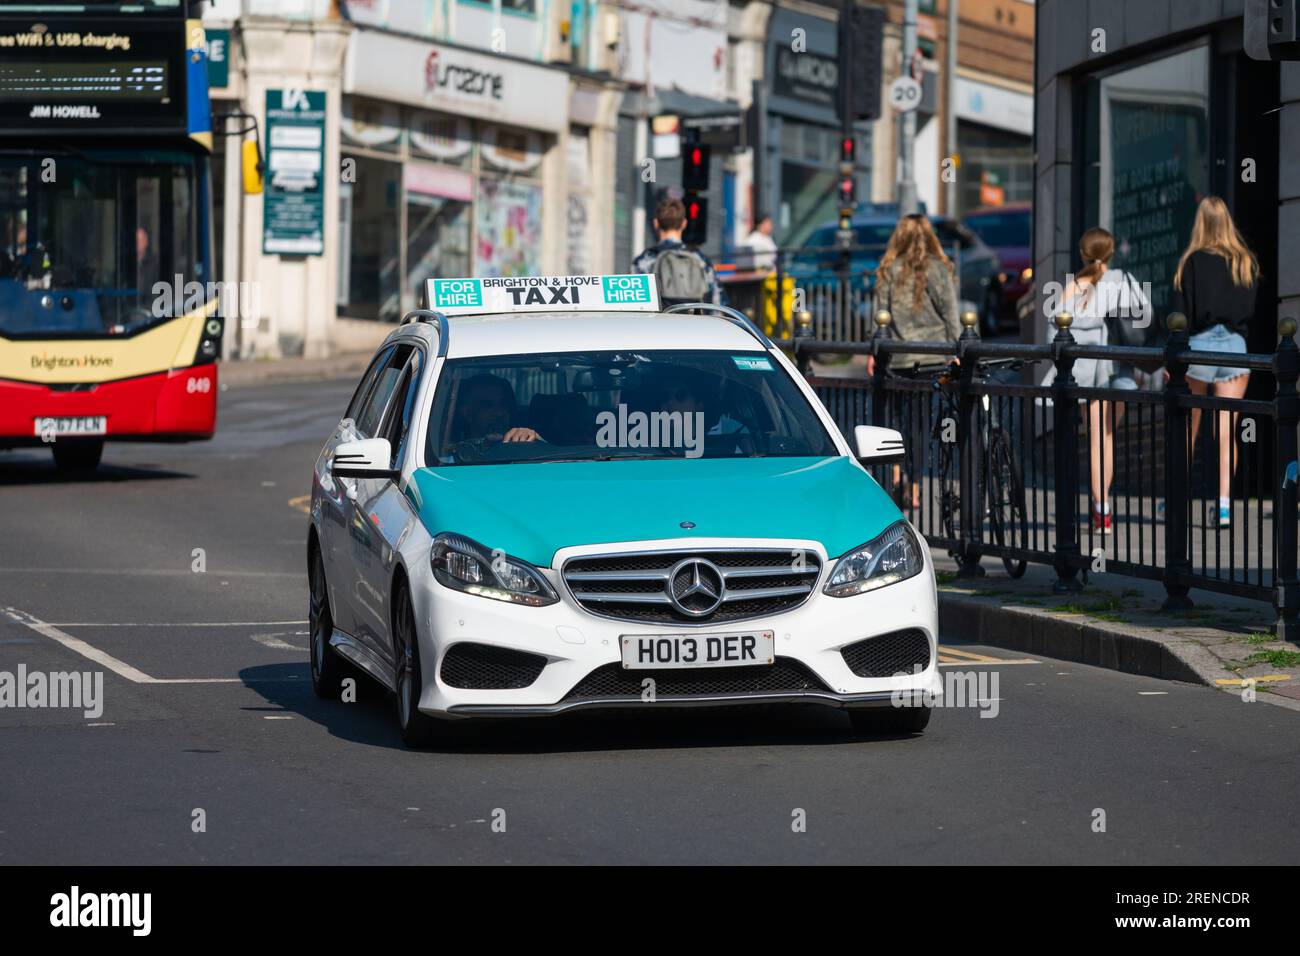 Taxi cab, a Mercedes car, in the busy city of Brighton & Hove, with green and white livery used by many Brighton taxis. In Brighton, England, UK. Stock Photo